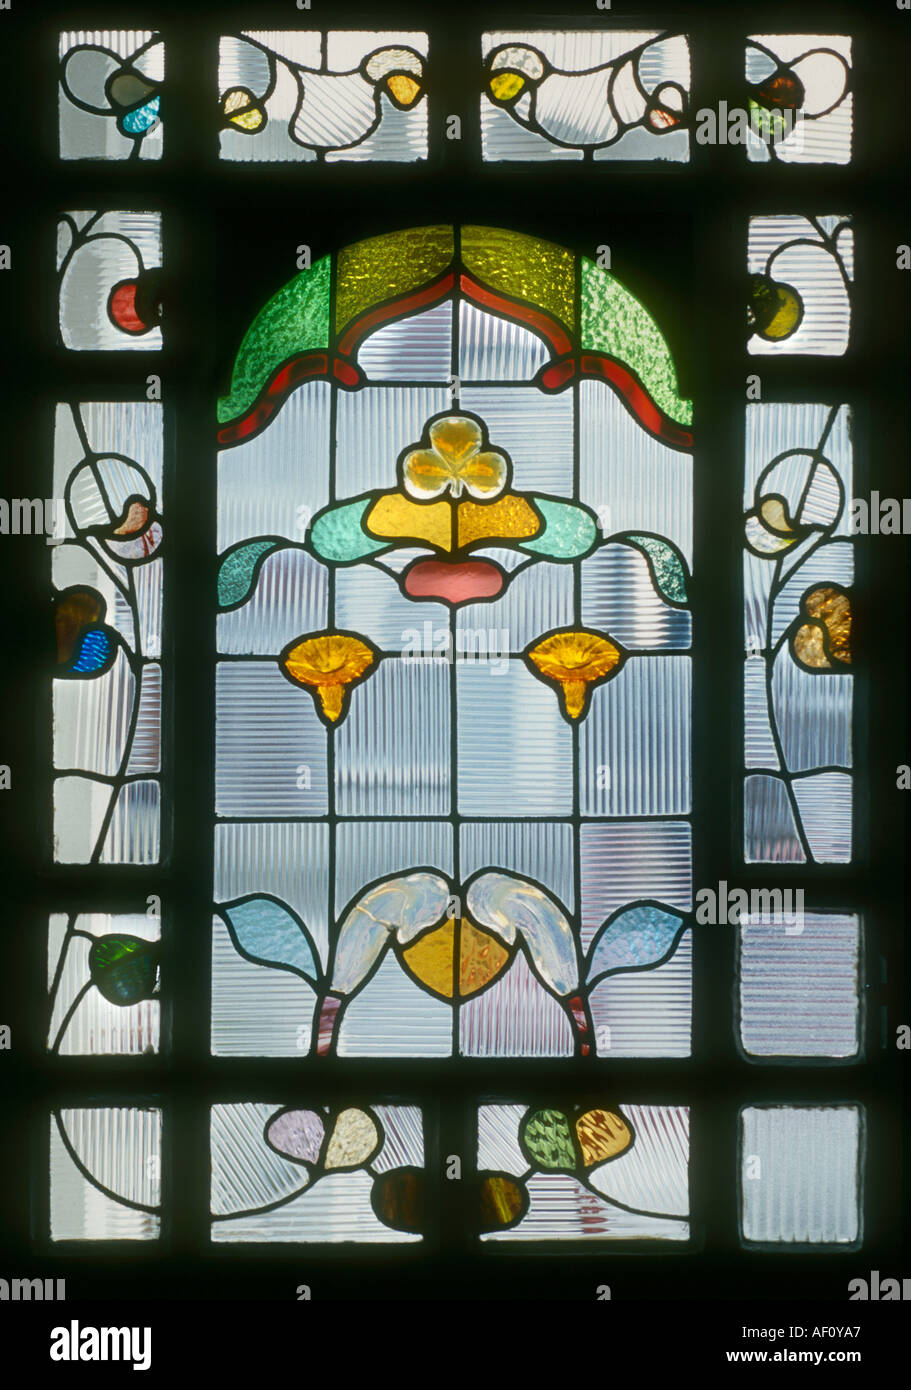 Decorative Stained Glass in the Art Nouveau style British Housing London Stock Photo